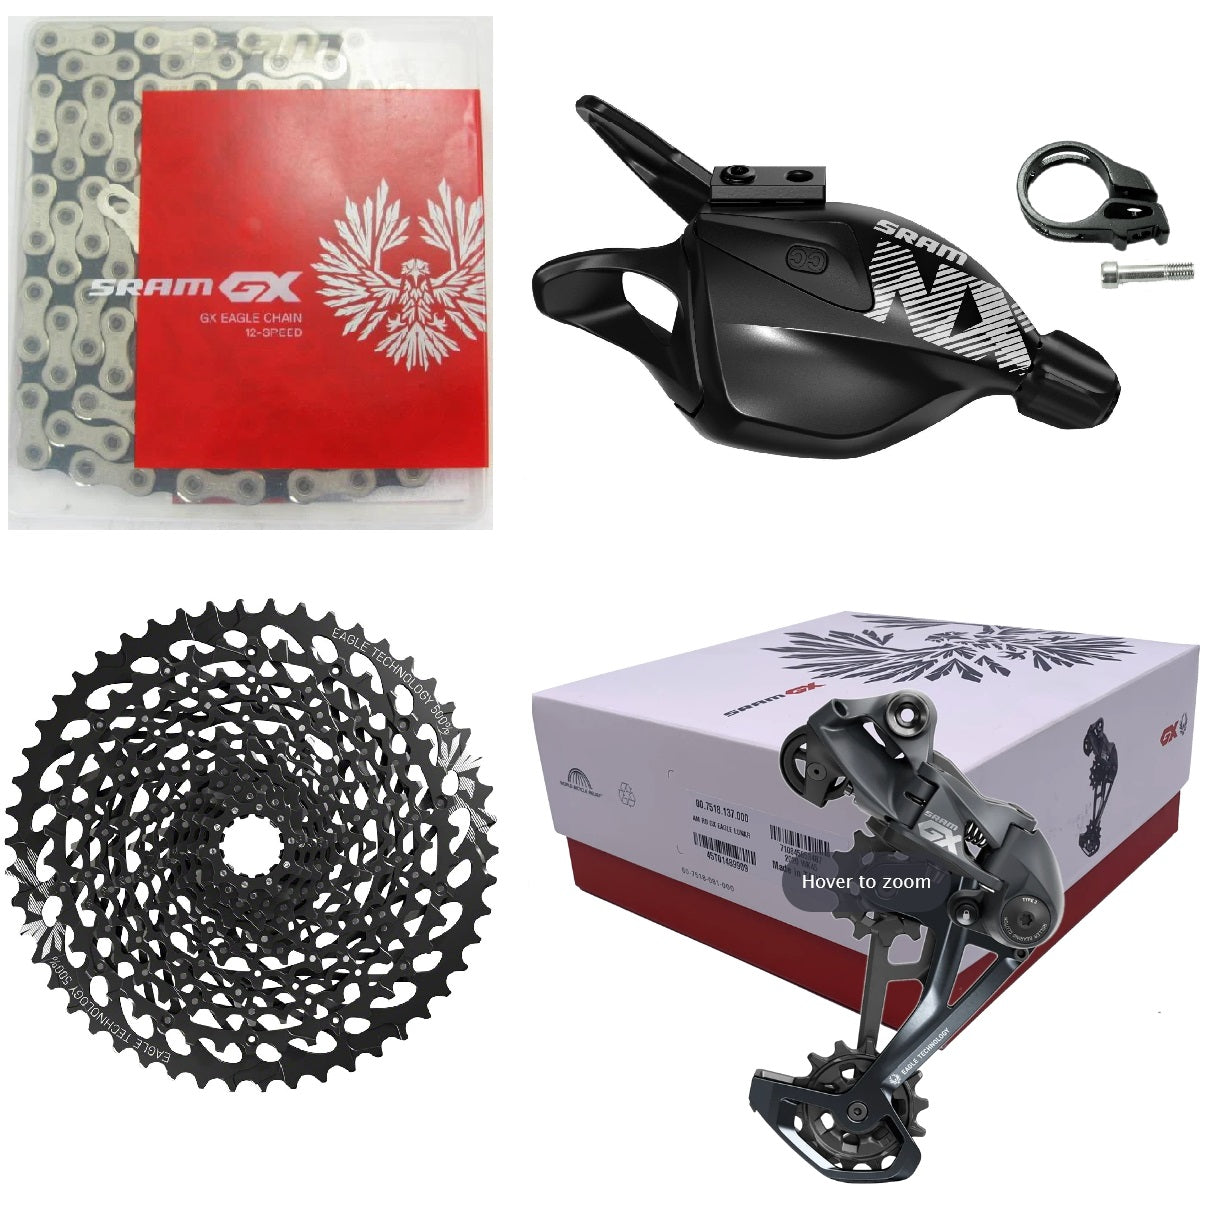 SRAM GX 12-speed Group with Nx Shifter - The Bikesmiths